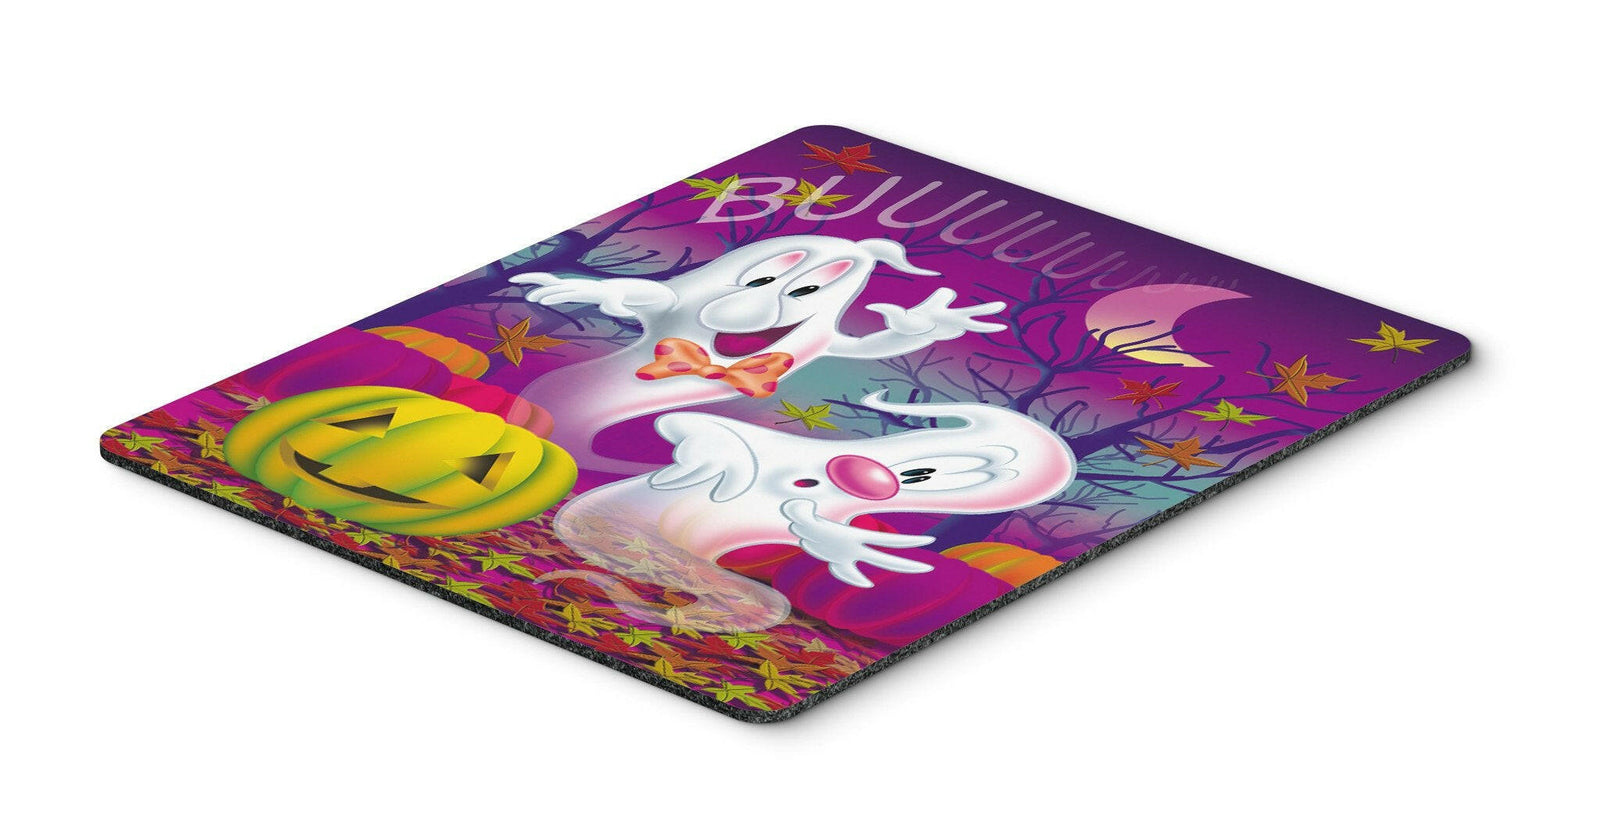 Buuu Ghosts Halloween Mouse Pad, Hot Pad or Trivet APH3798MP by Caroline's Treasures